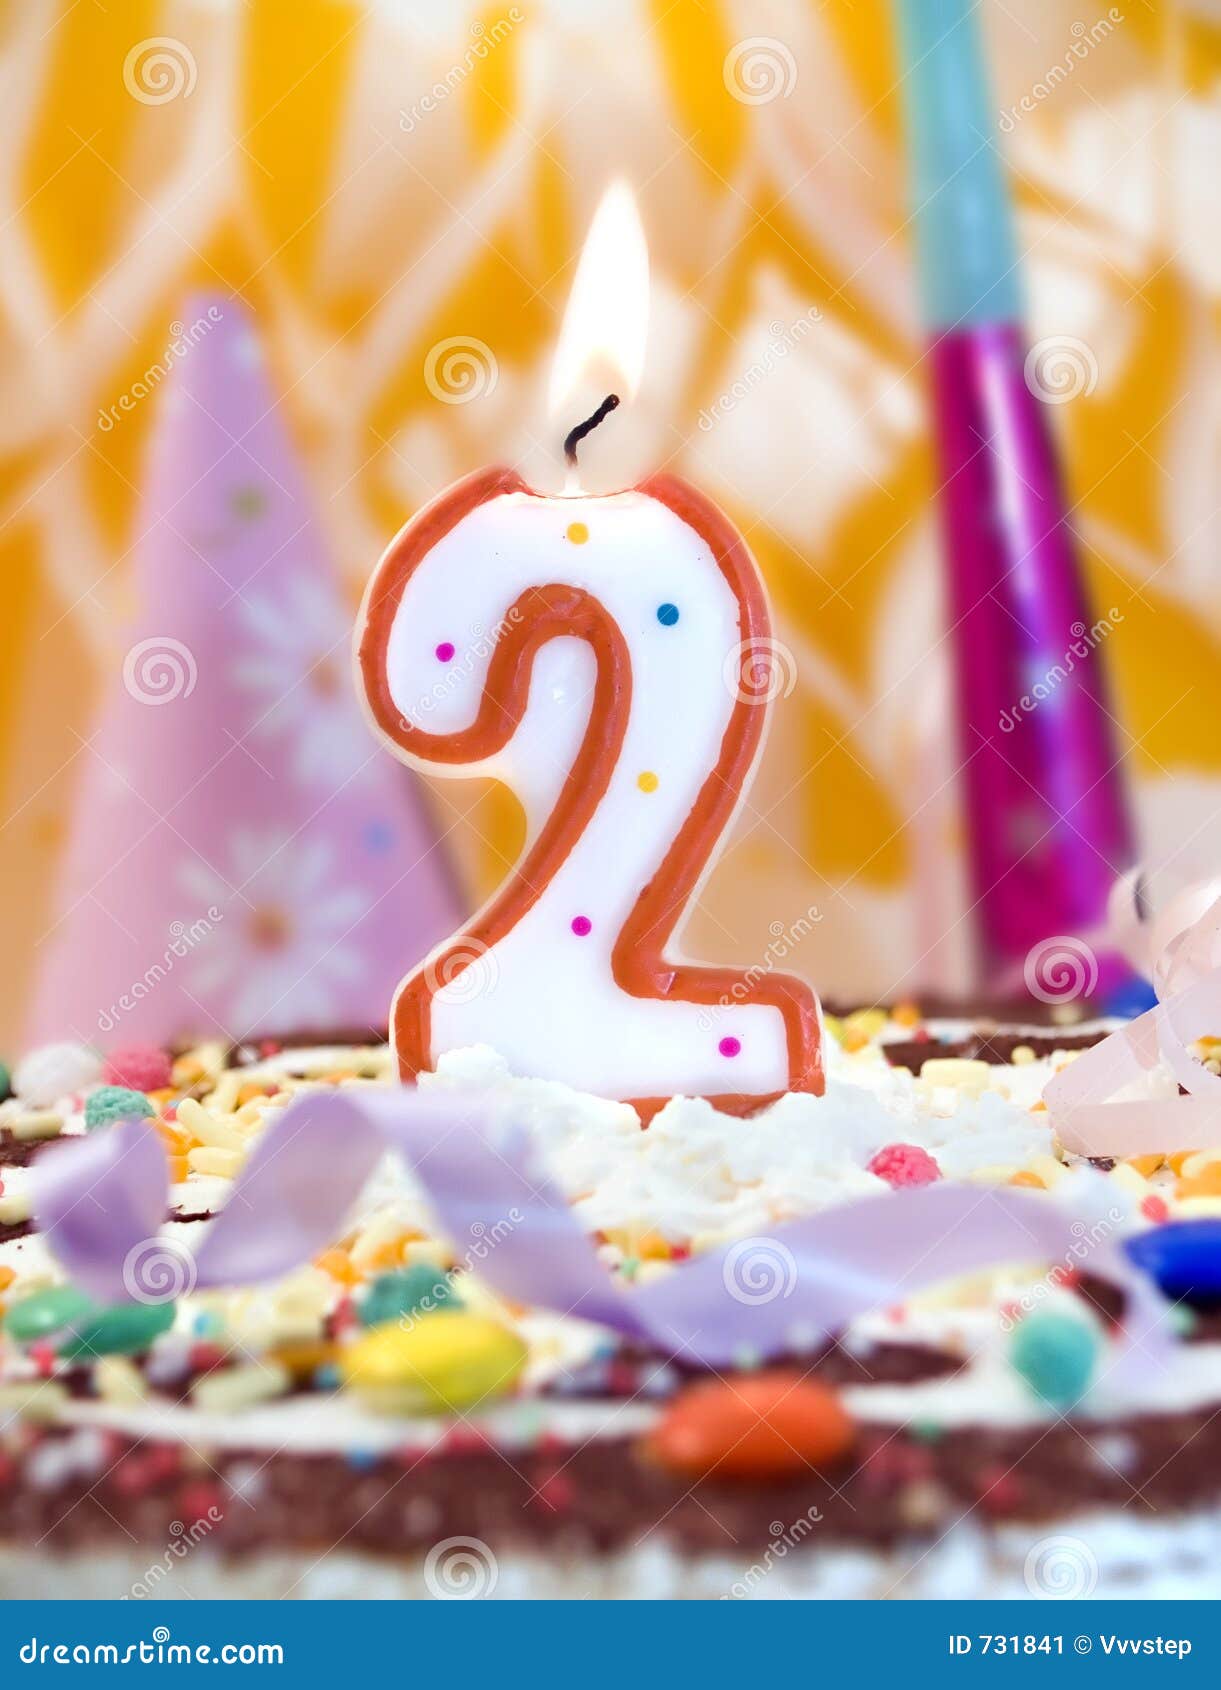 Make a wish stock image. Image of devices, number, candles - 731841